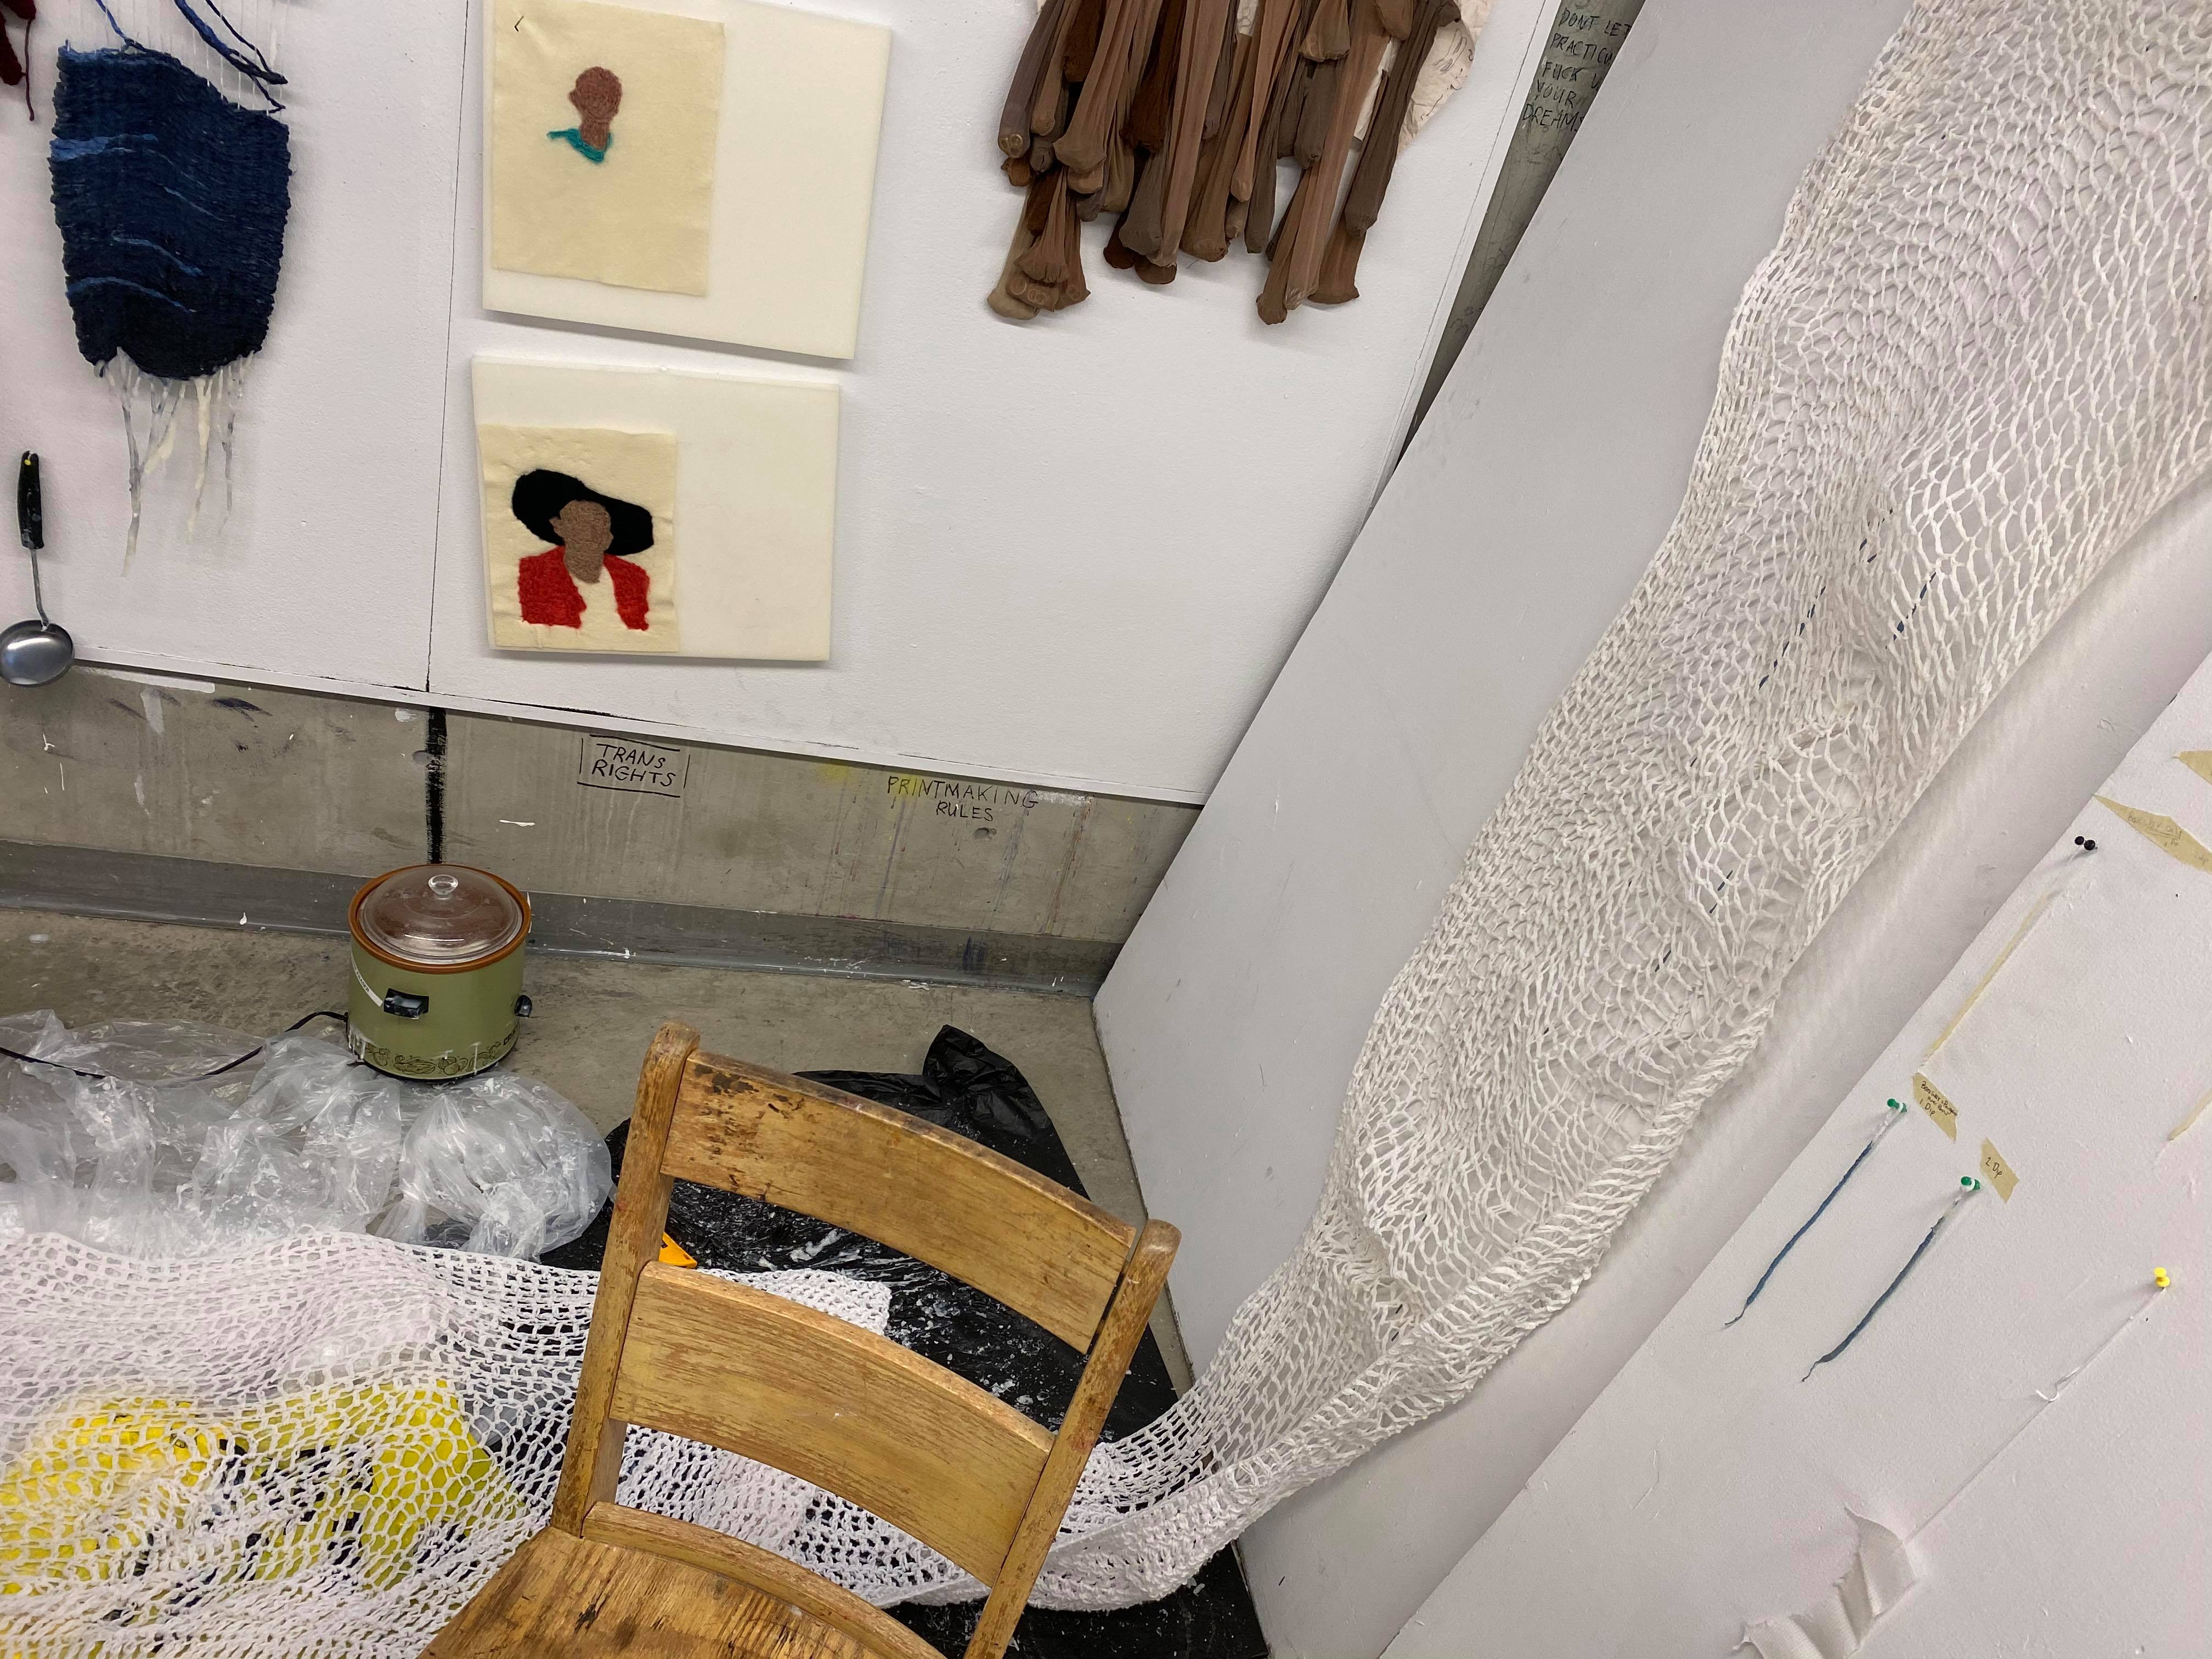 Photo of an emmpty chair, fabric, and samples of art hanging on a wall.